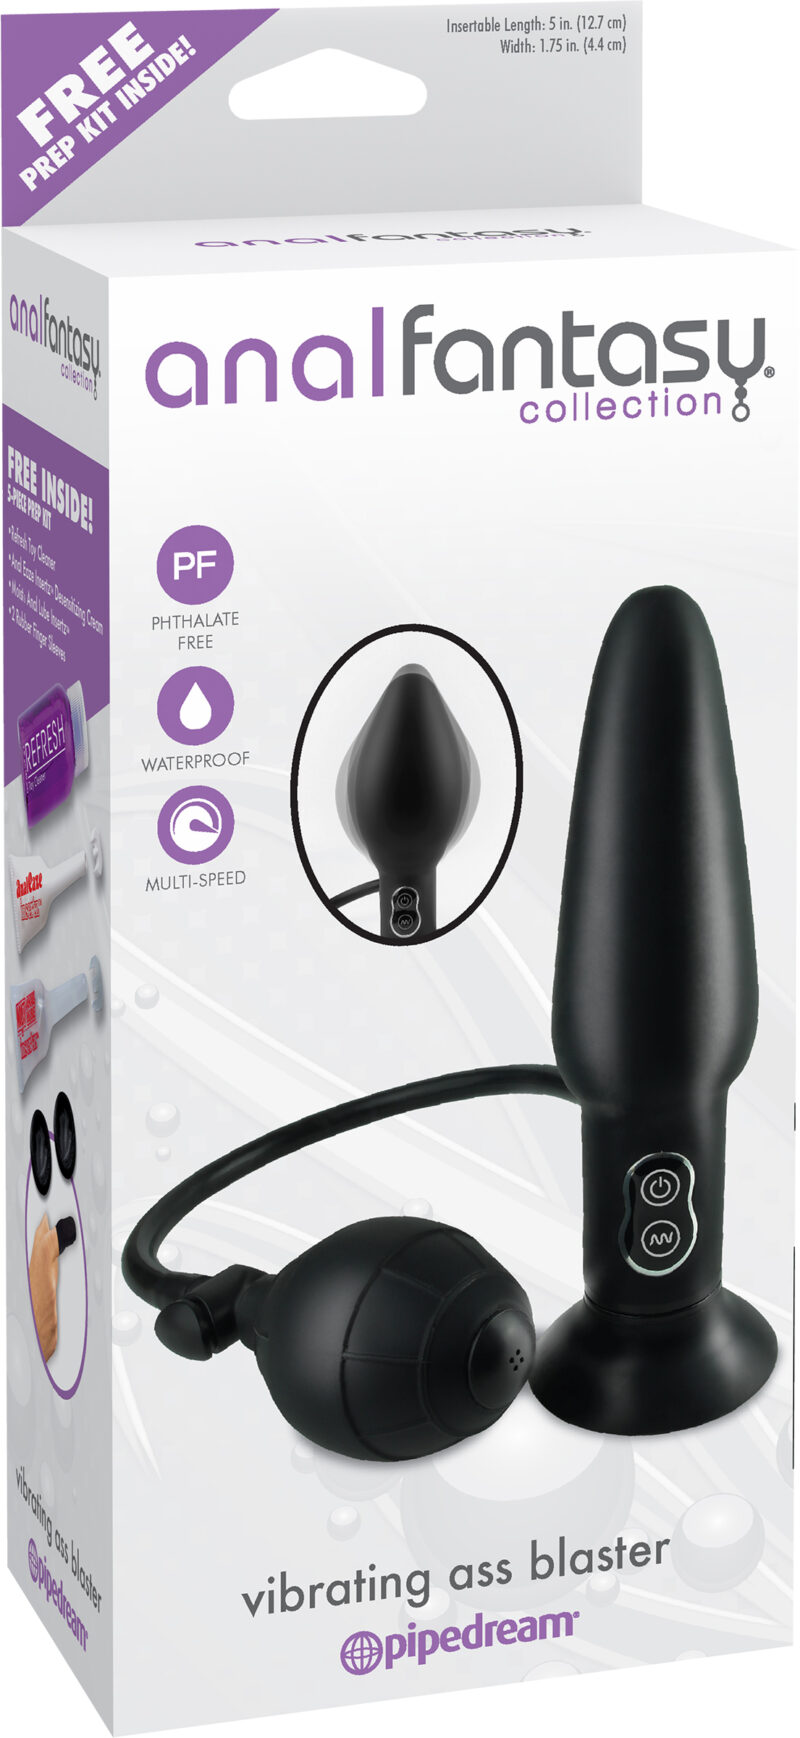 Pipedream Anal Fantasy Vibrating Ass Blaster